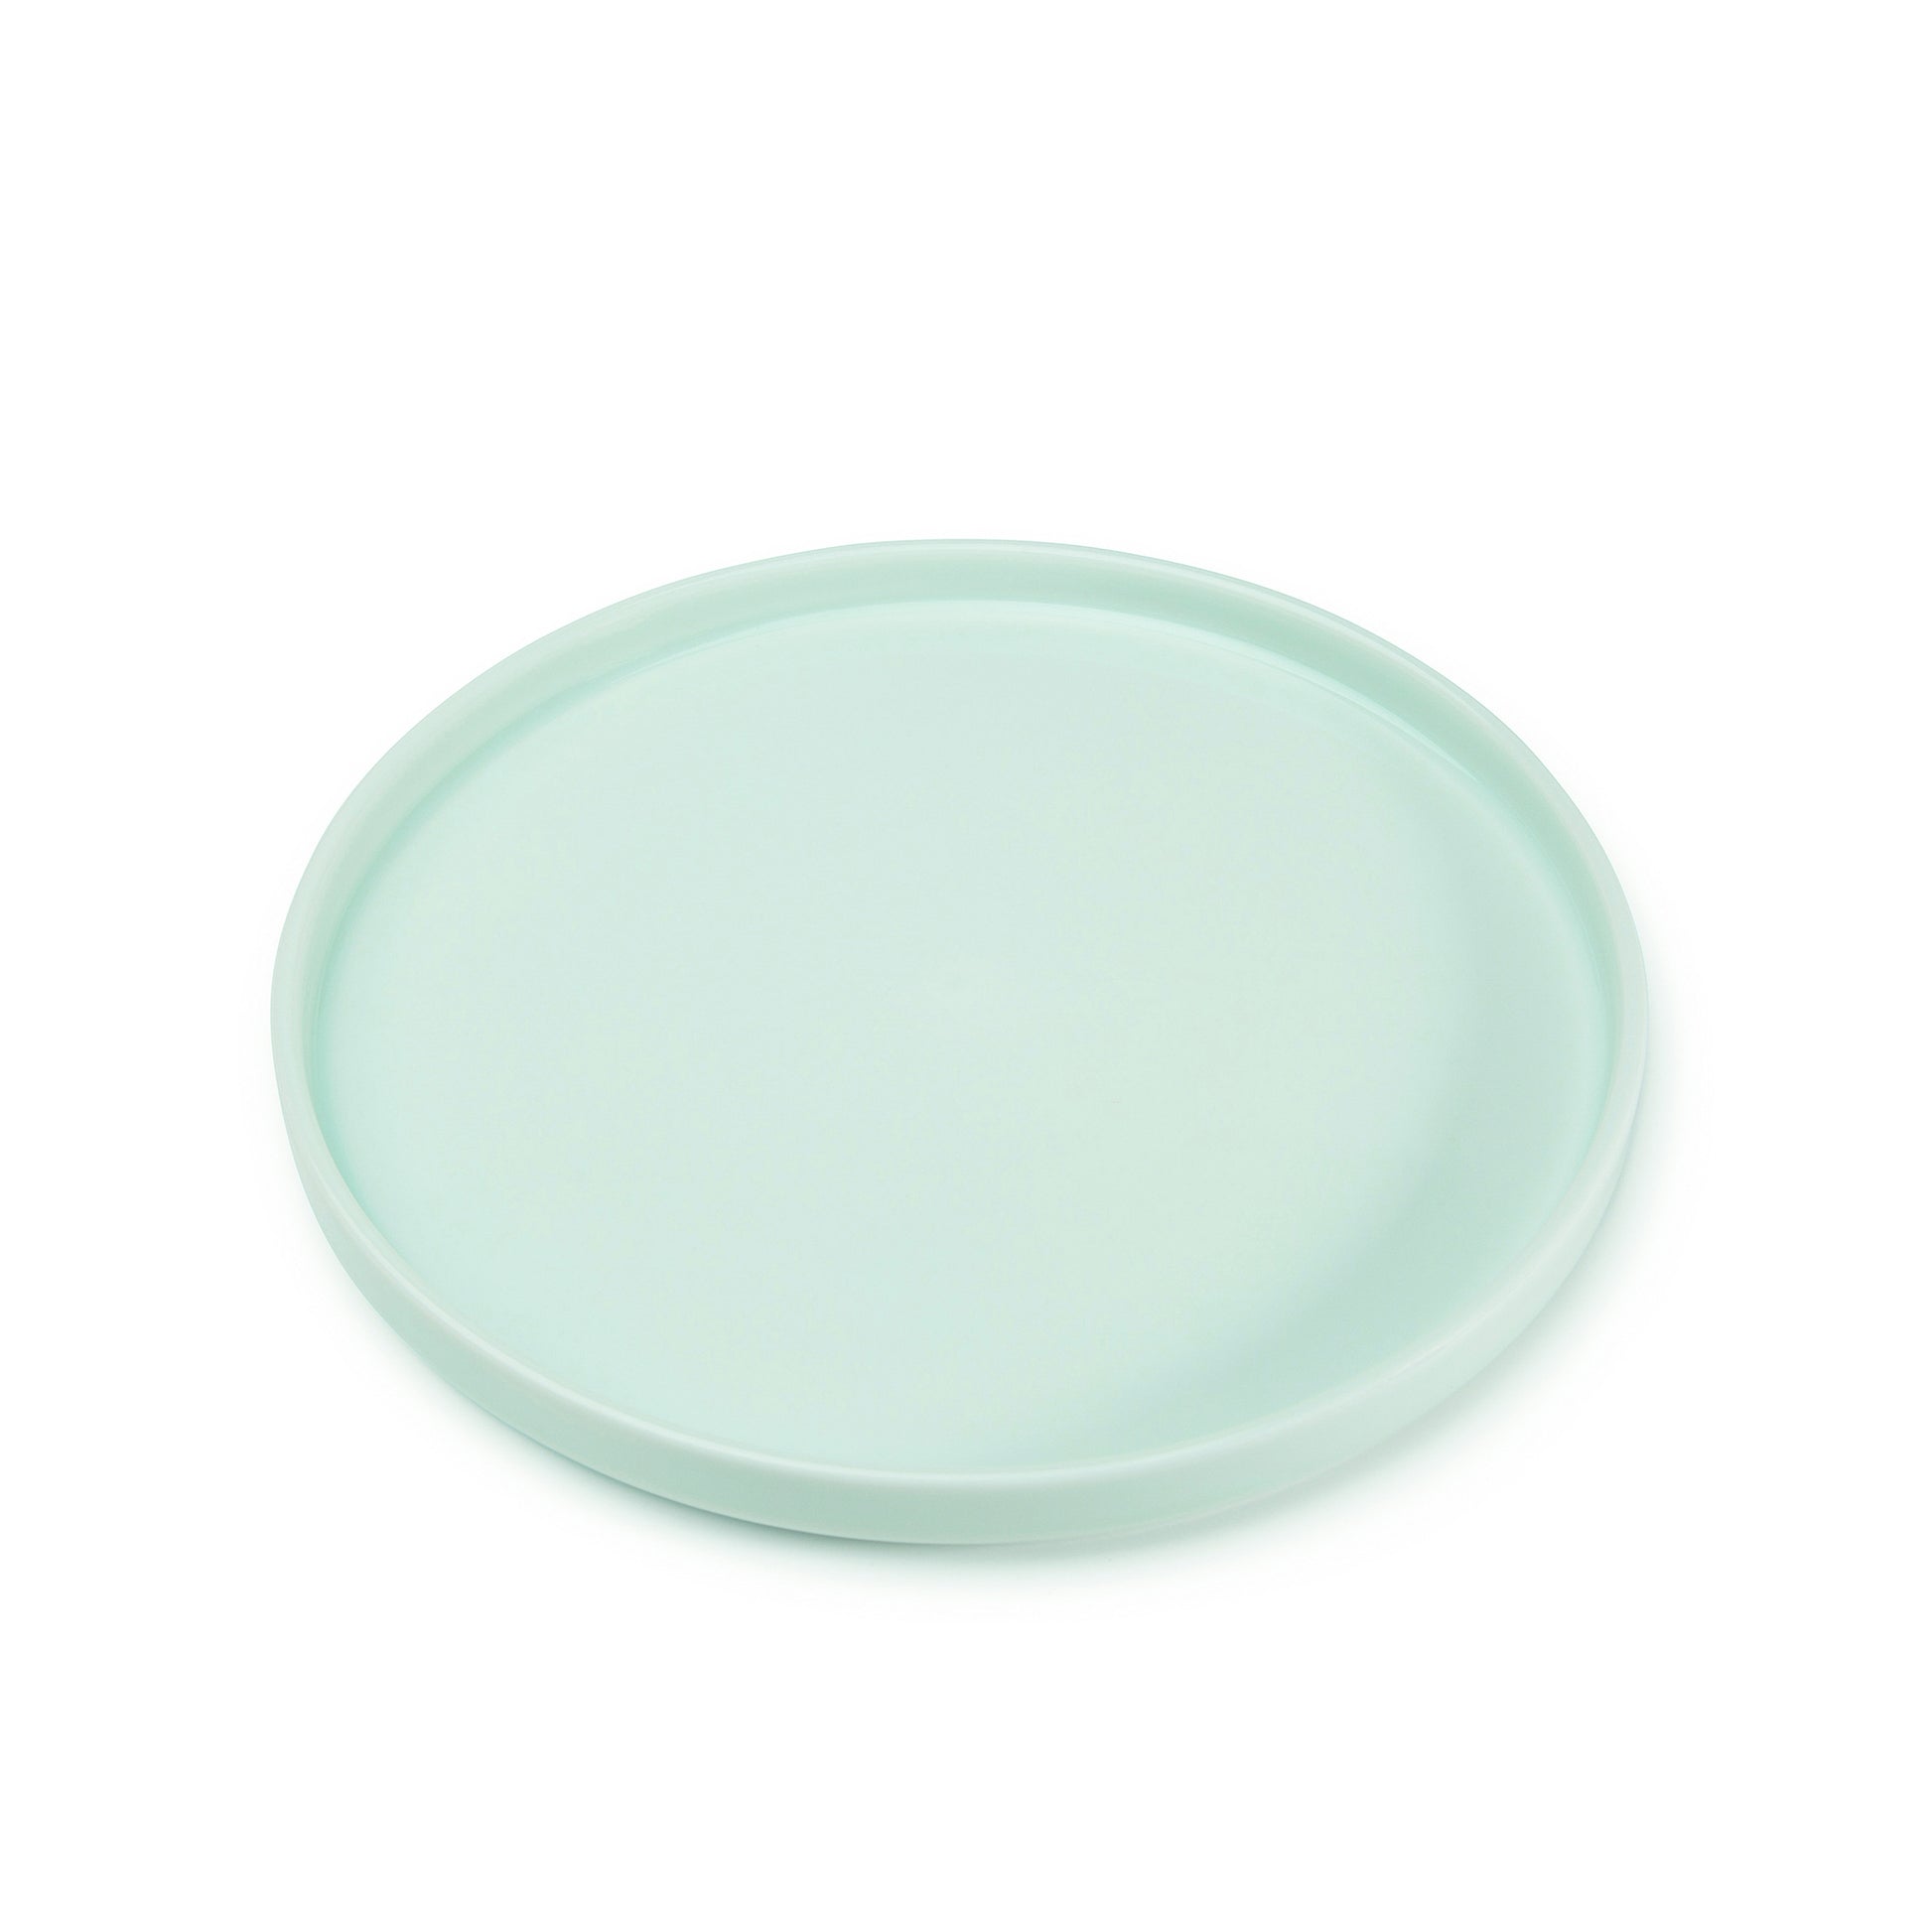 11" green celadon porcelain straight-sided dinner plate, 60 degree angle view, media 3 of 5